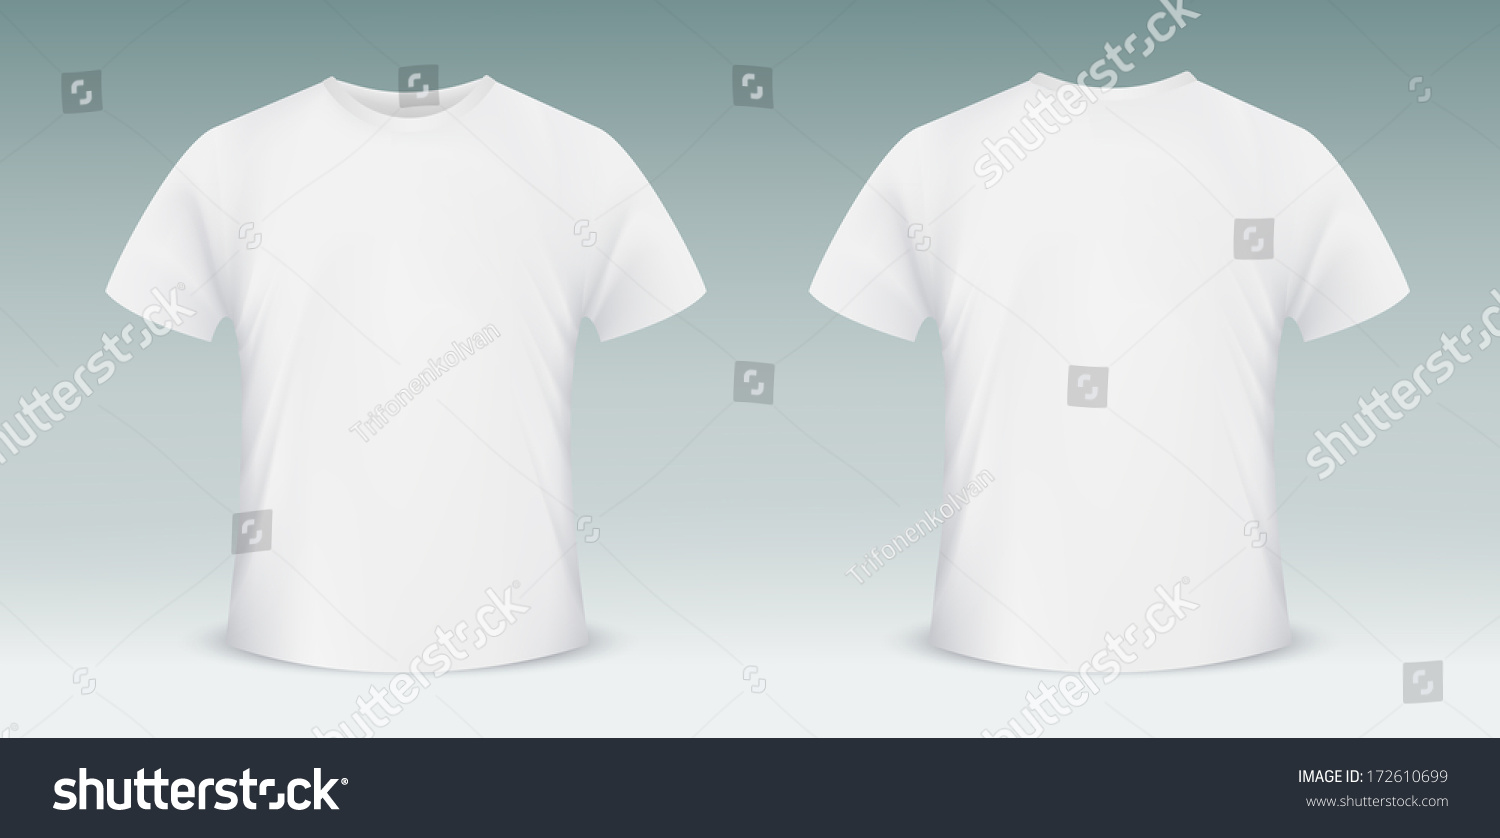 Download Blank Tshirt Template Front Back Side Stock Vector ...